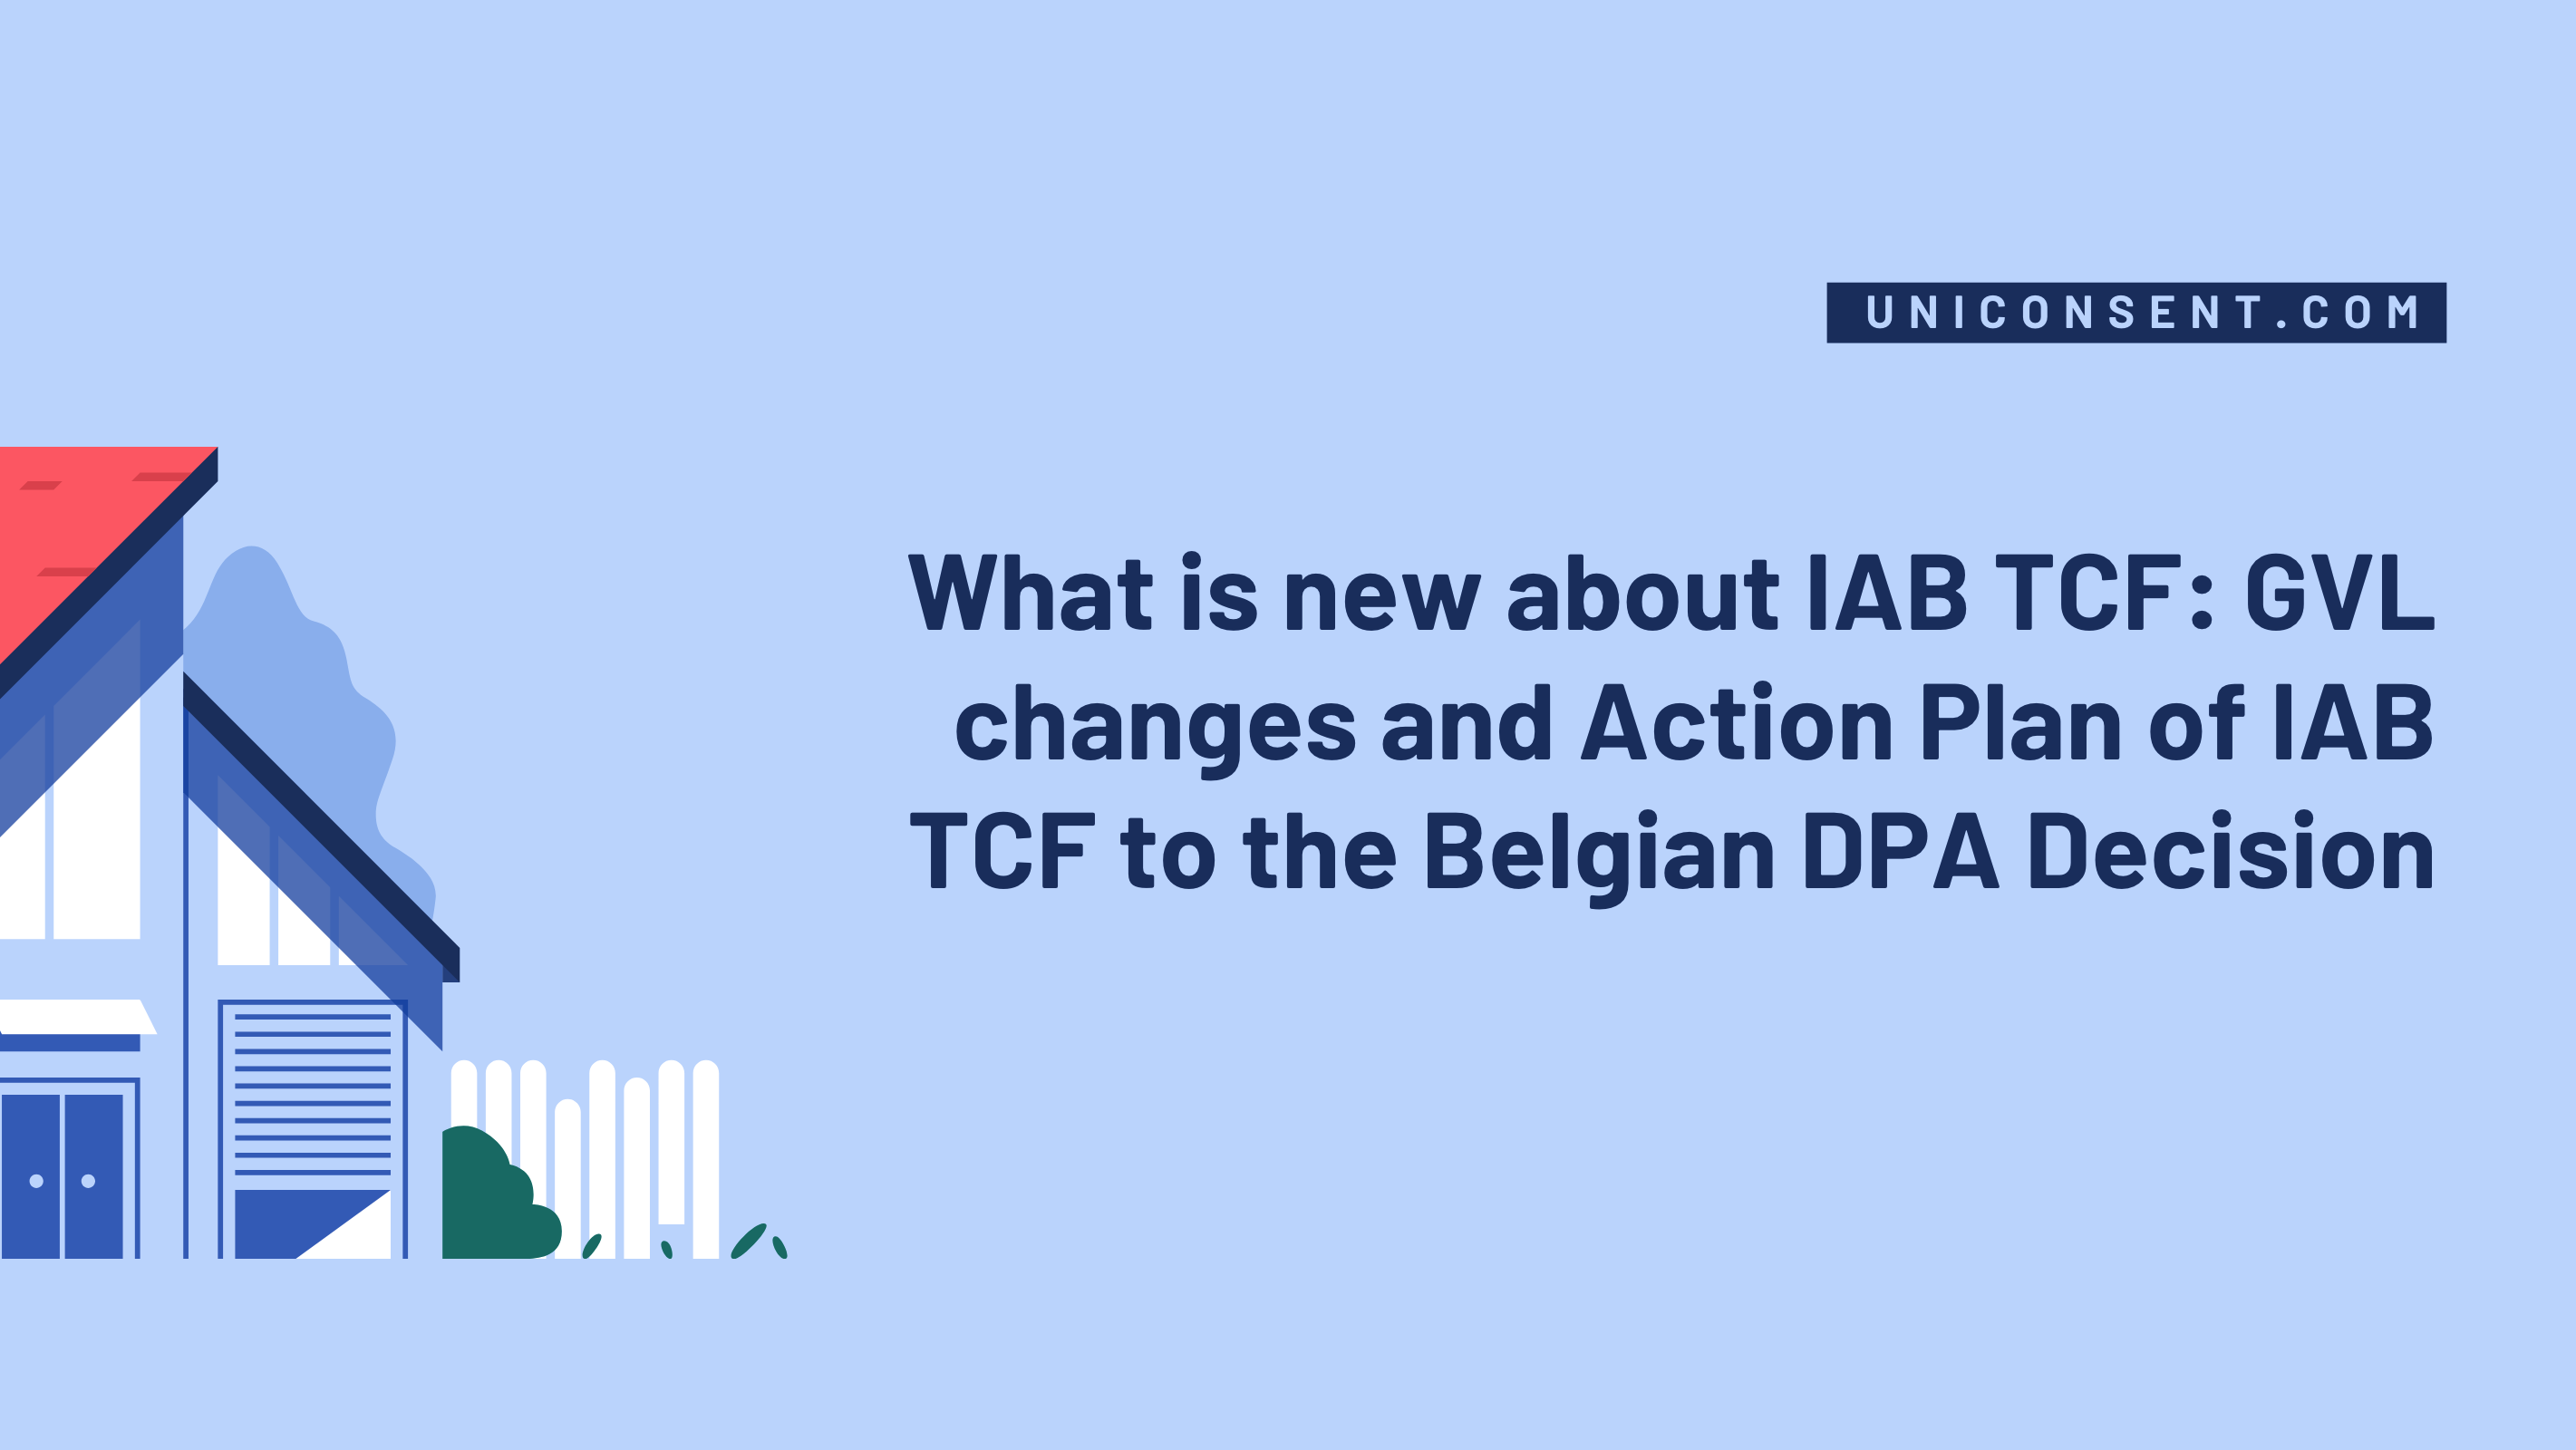 IAB TCF changes: GVL changes and Action Plan of IAB TCF to the Belgian DPA - UniConsent